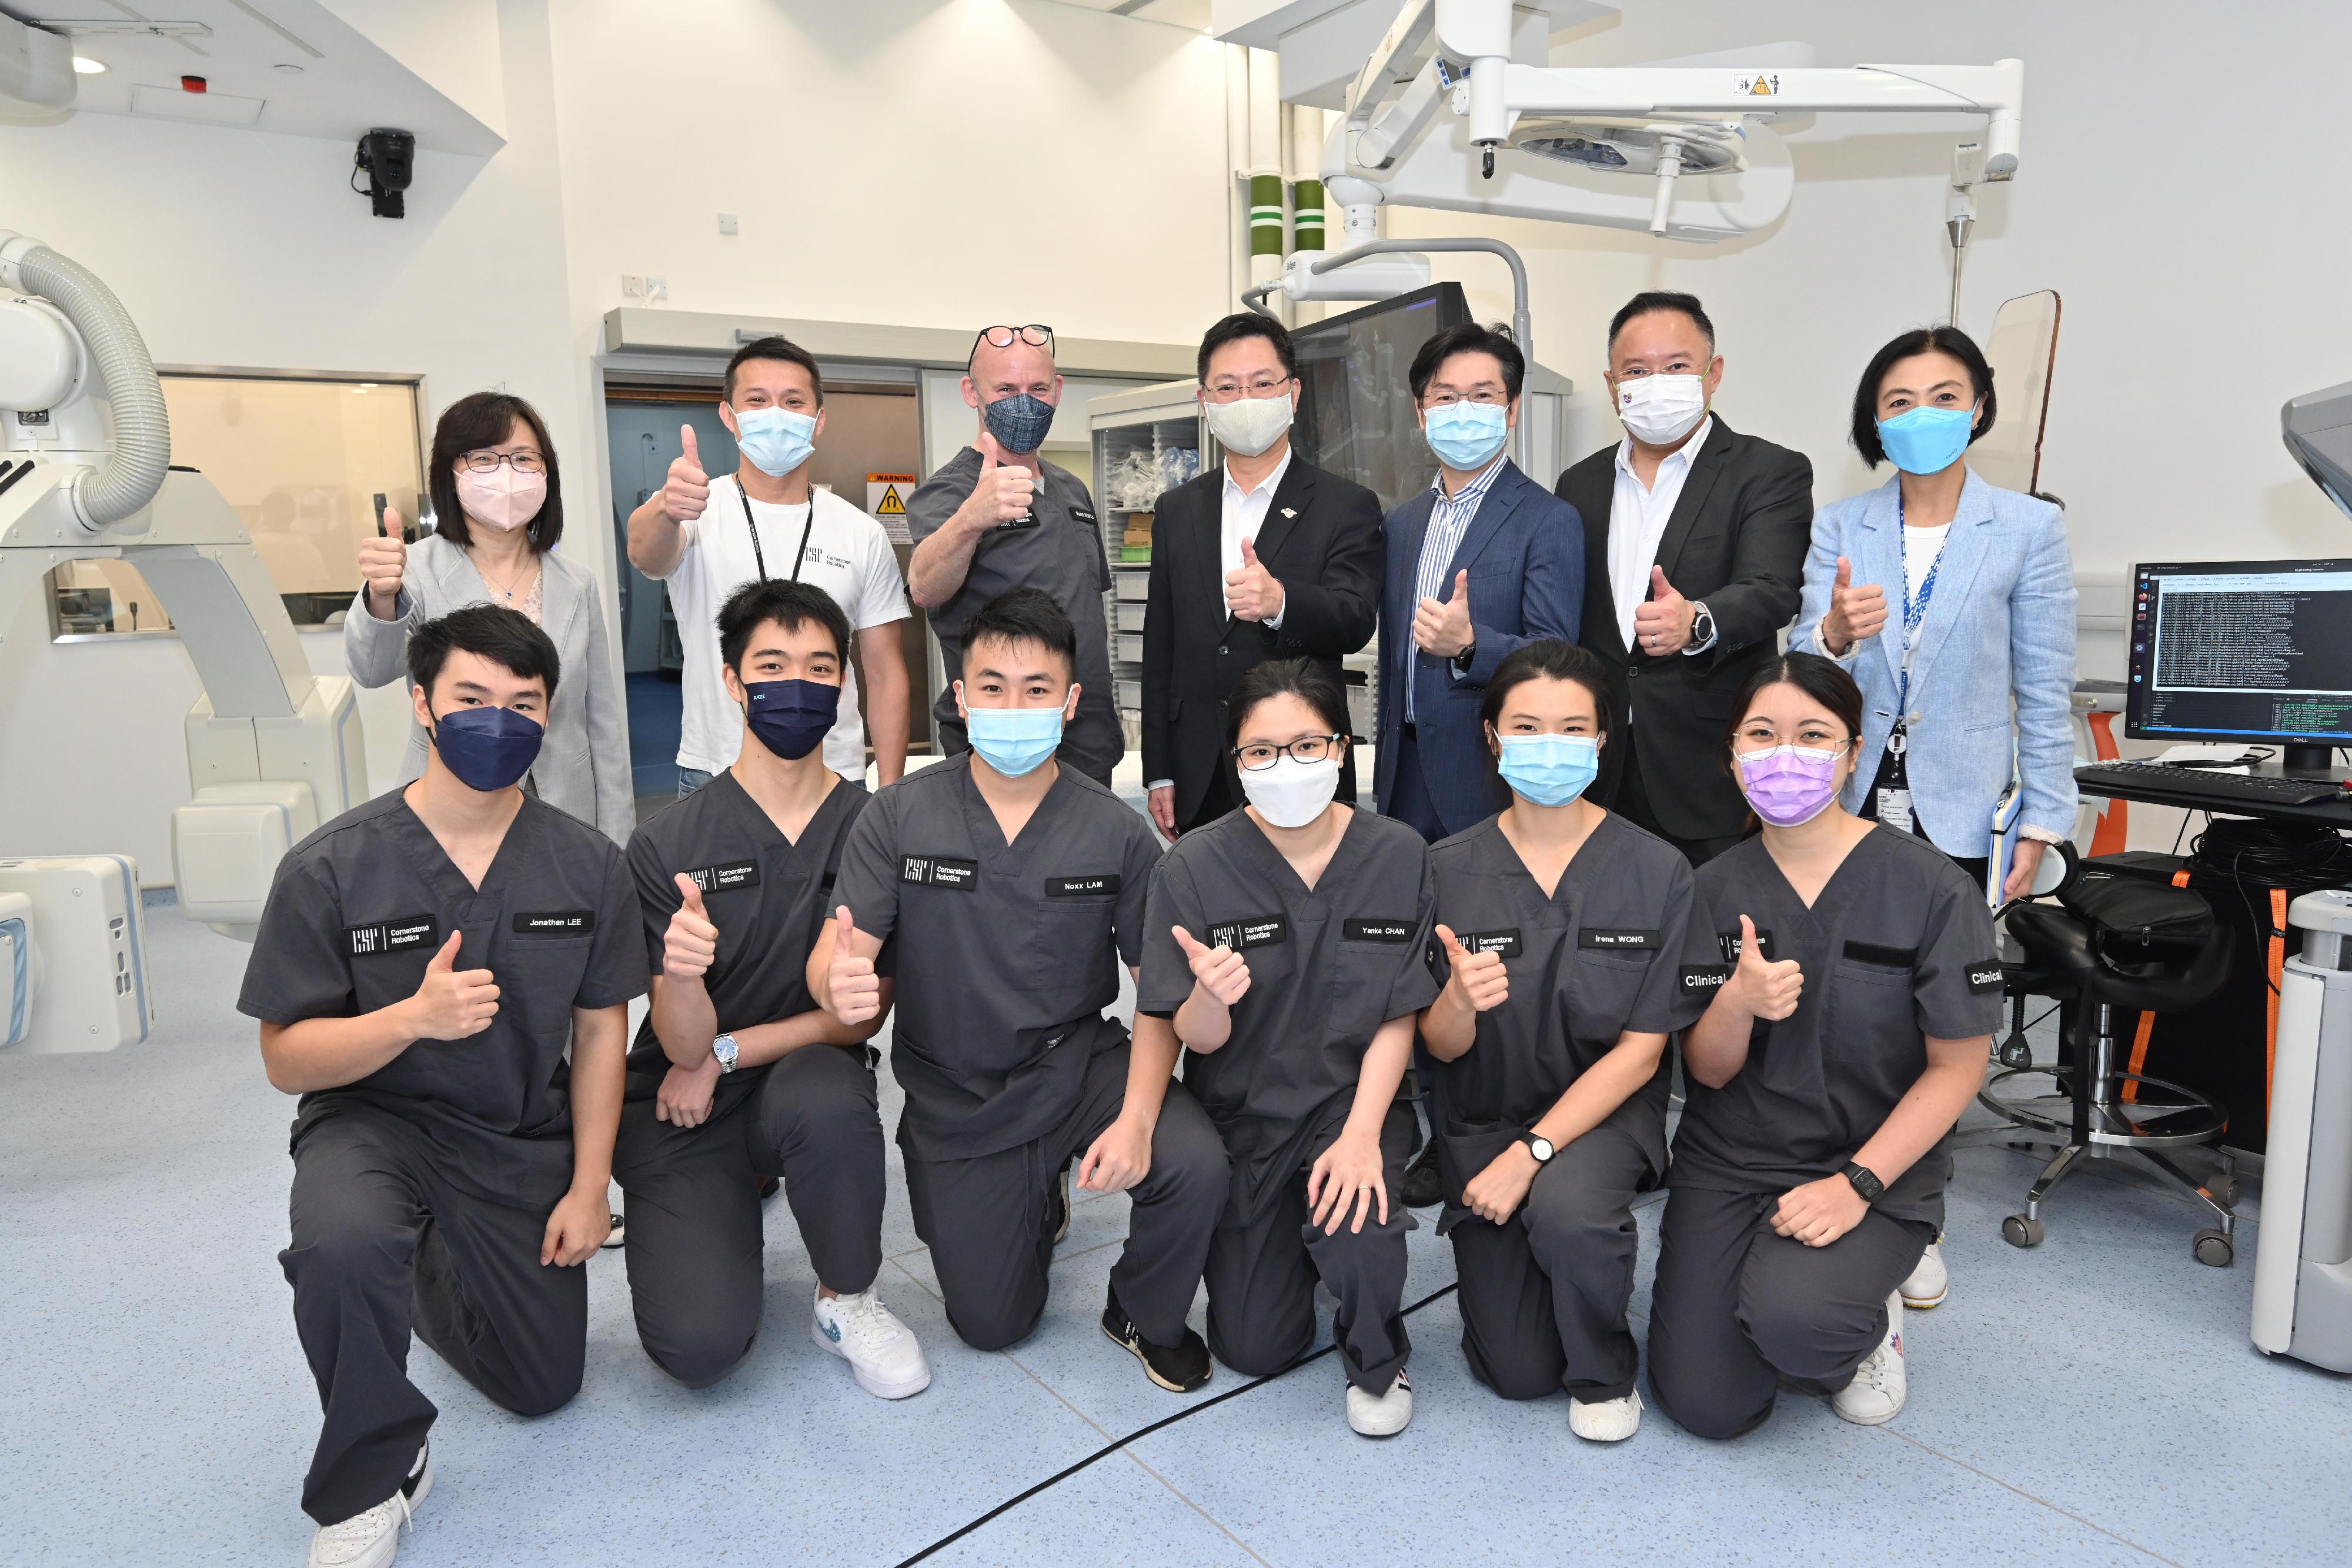 The Secretary for Innovation and Technology, Mr Alfred Sit (back row, centre), together with the Commissioner for Innovation and Technology, Ms Rebecca Pun (back row, first left), joins a group photo with the research team during the visit to the Multi-Scale Medical Robotics Center today (June 14).